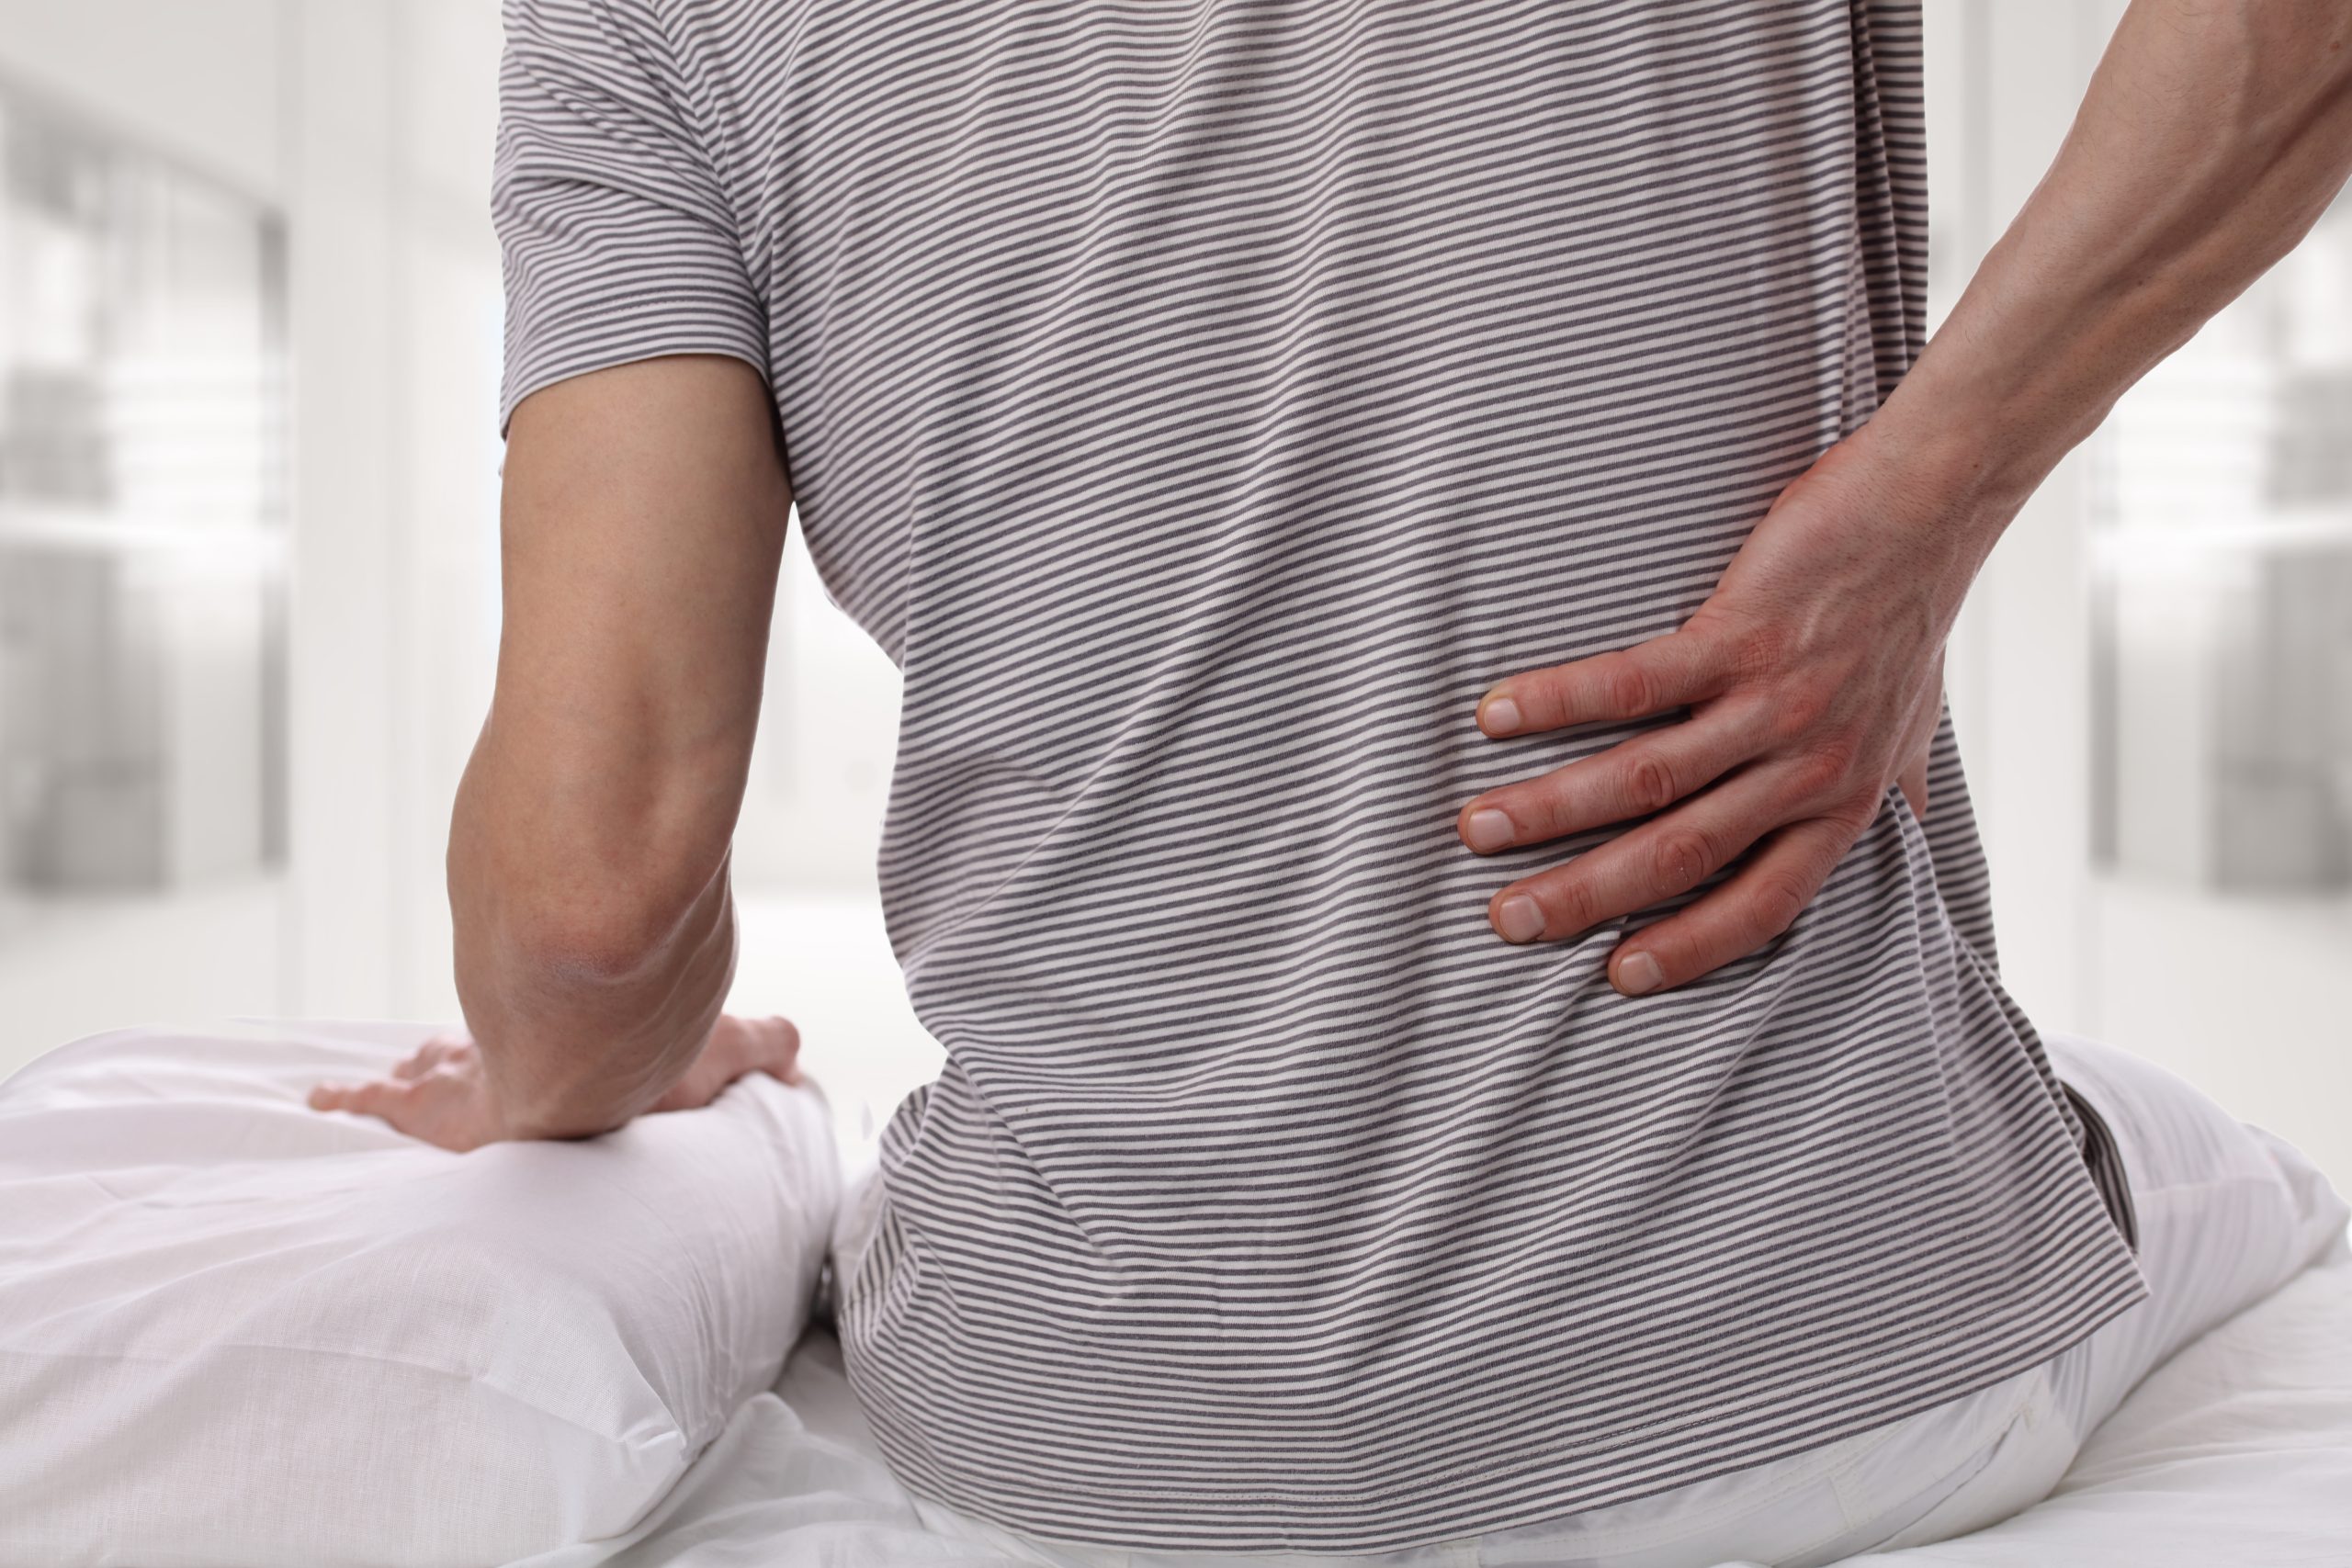 Can a physiotherapist help with scoliosis?